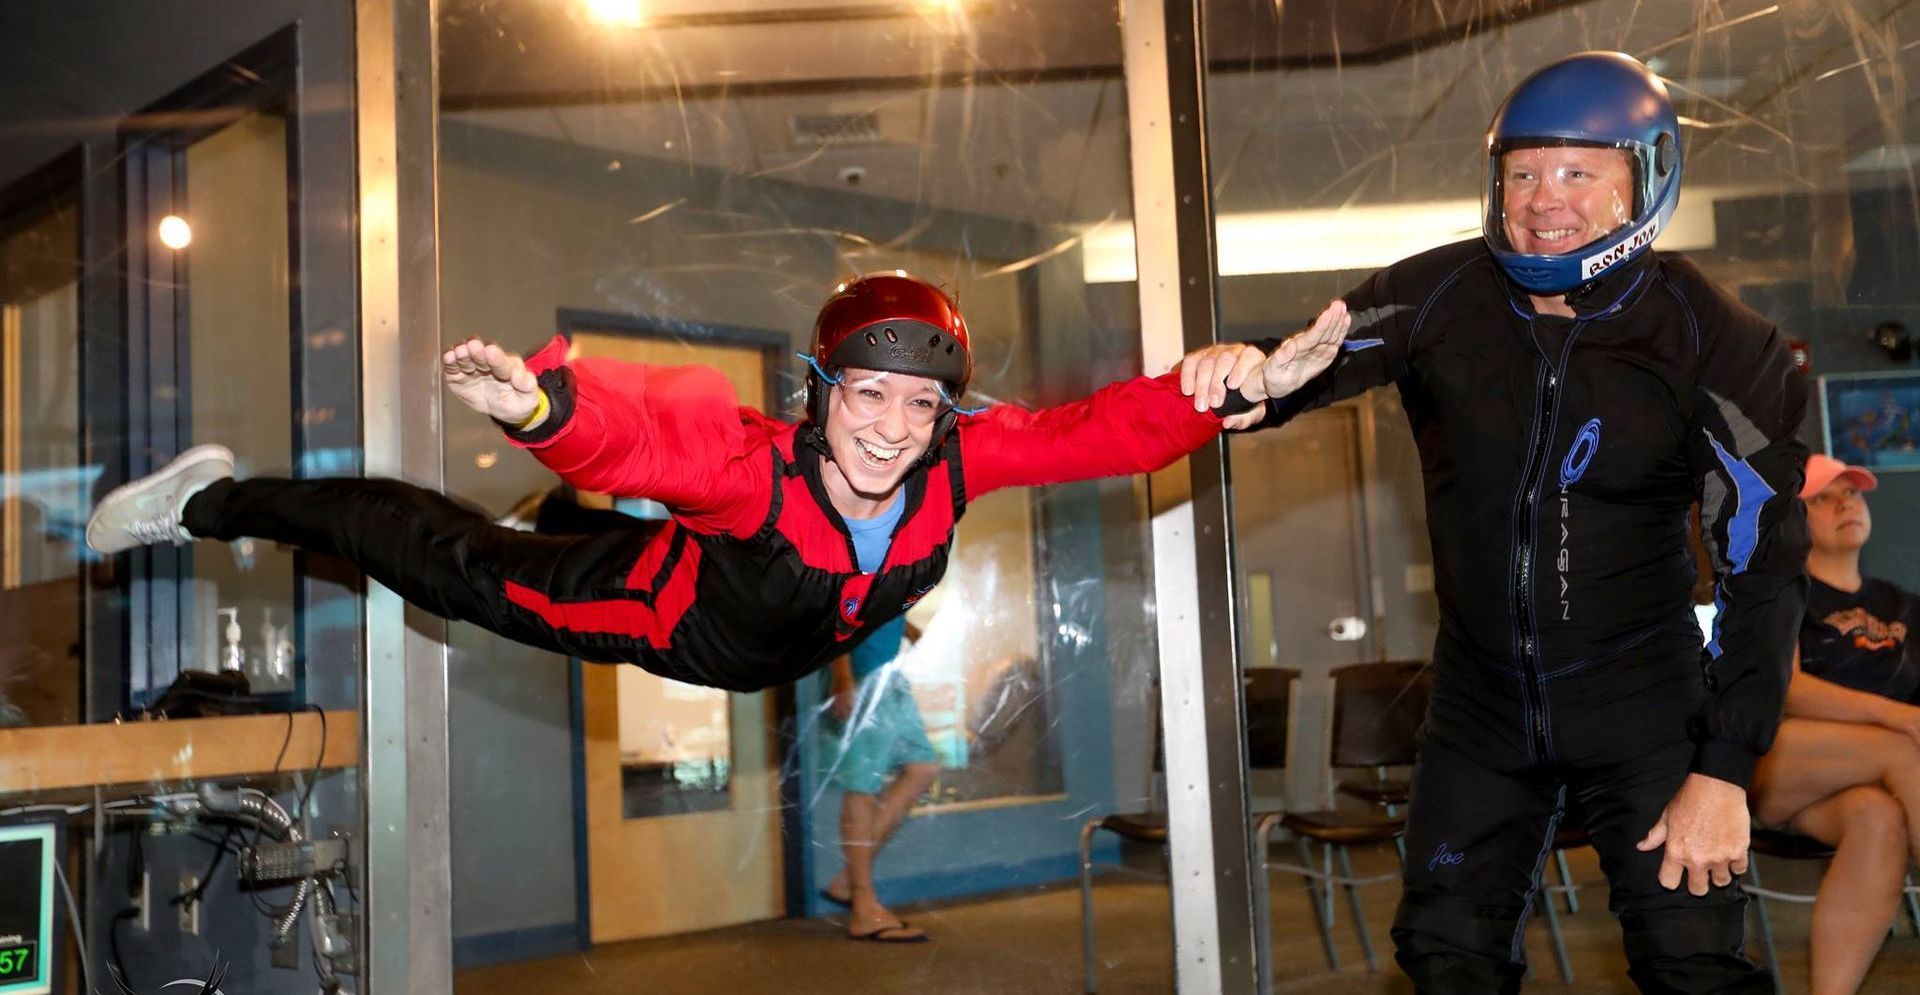 
World’s First Skydiving and Indoor Surf Park, world record in Nashua, New Hampshire